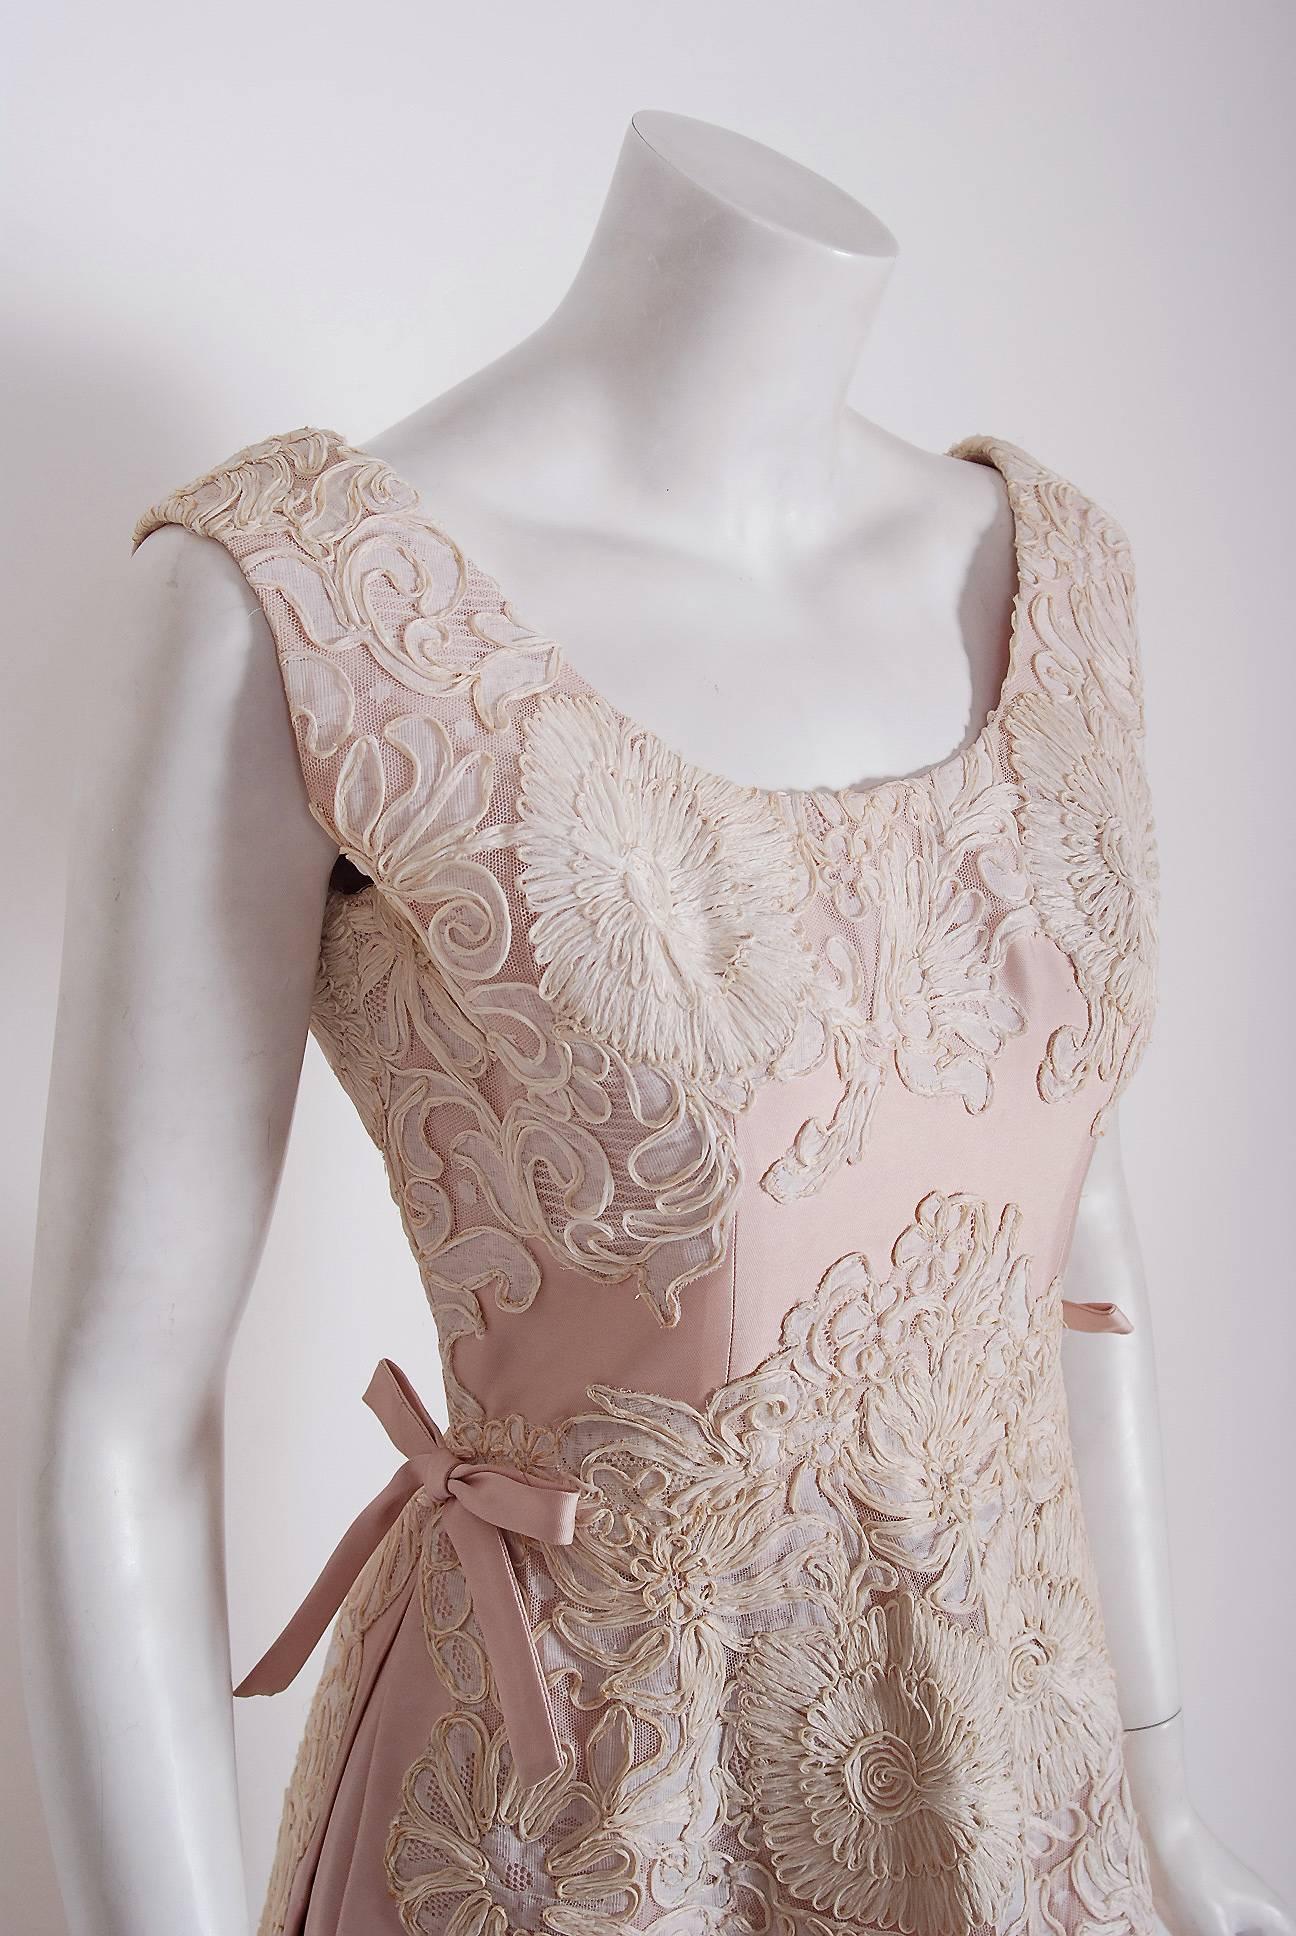 Breathtaking Pierre Balmain gown dating back to his 1966 Spring/Summer collection. Pierre Balmain worked under Robert Pigiuet, Molyneux, and Lucian Lelong, where he worked closely with Christian Dior. In 1945 is finally opened his own couture house.